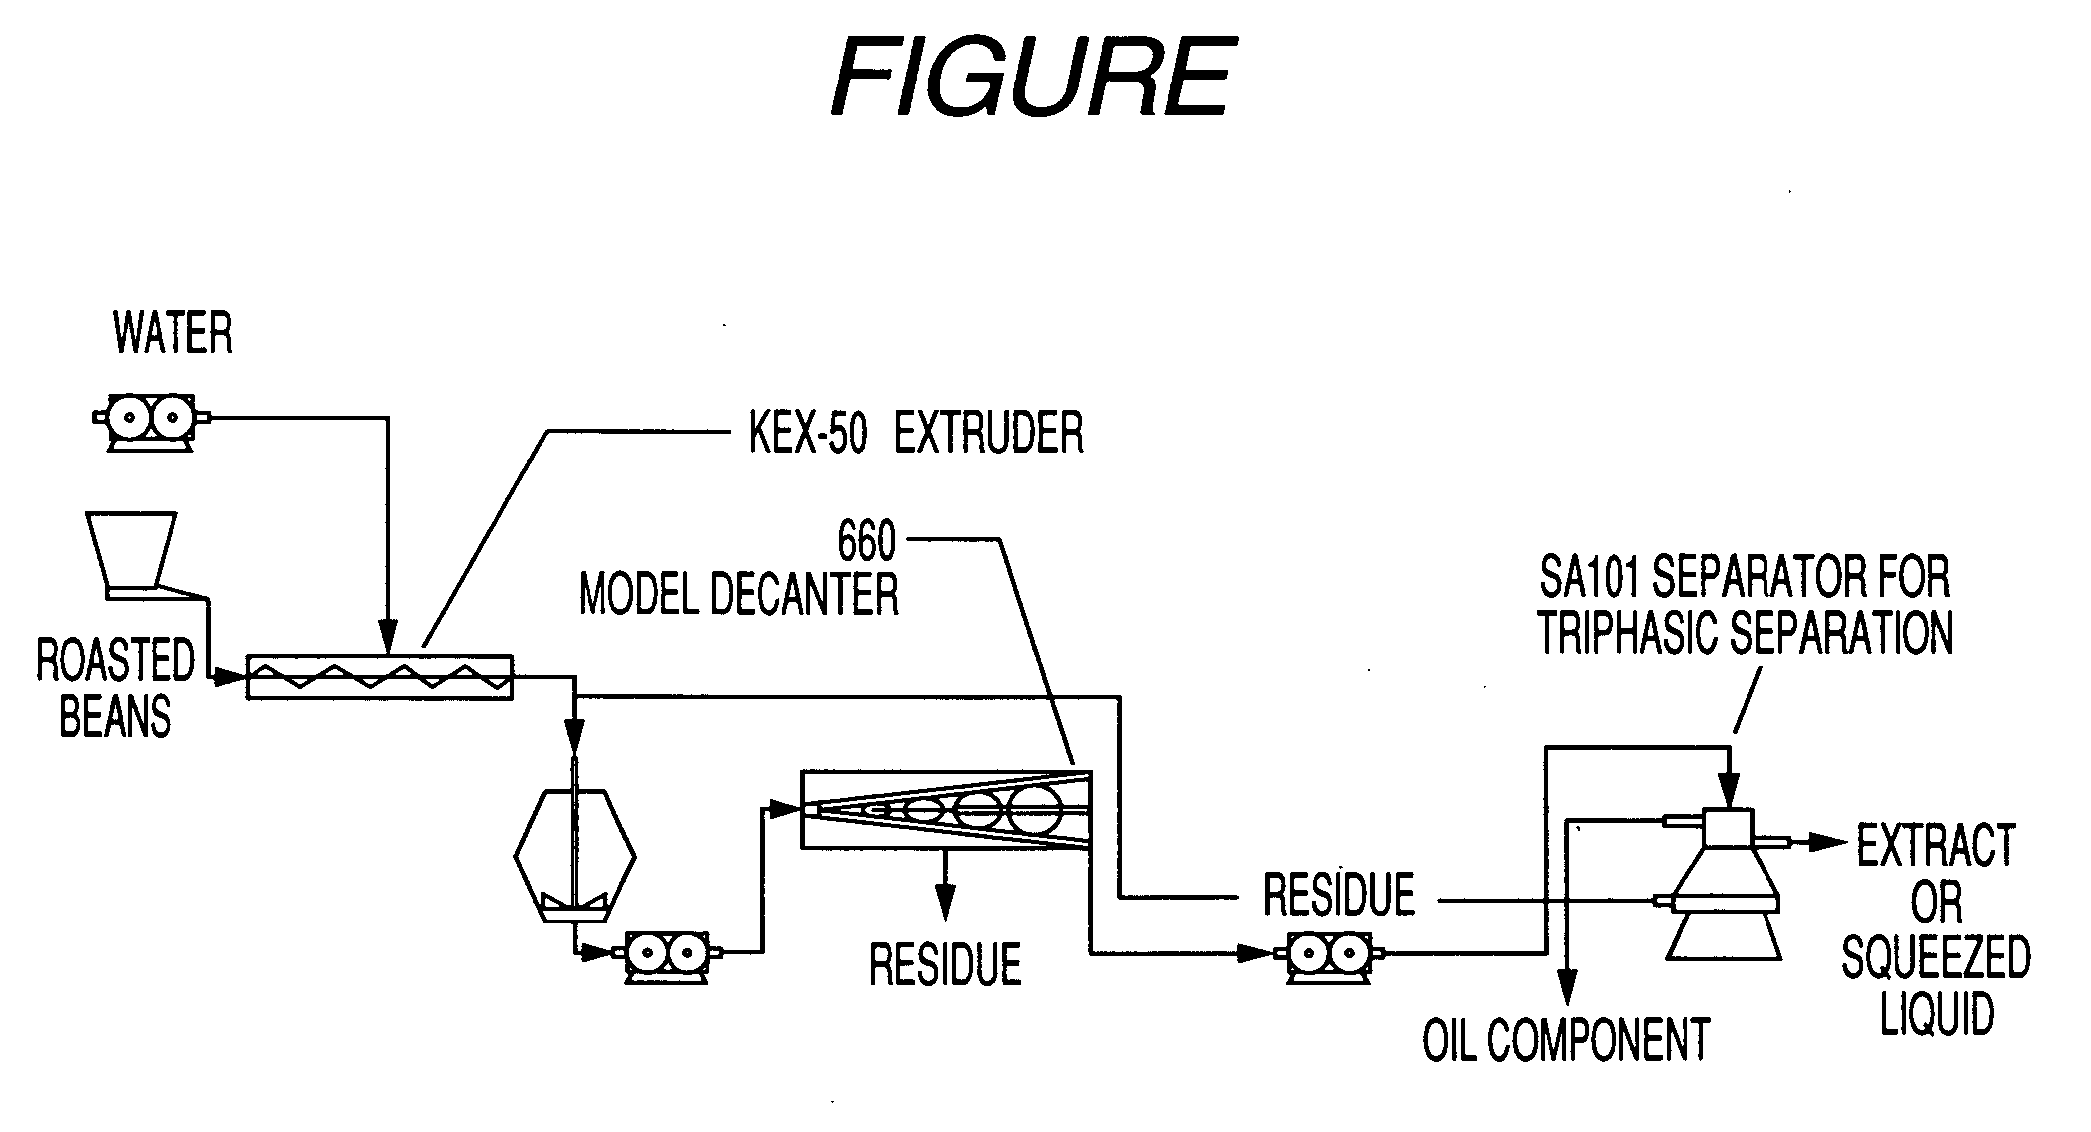 Solid-liquid separation method for continously extracting and/or pressing edible food and drink